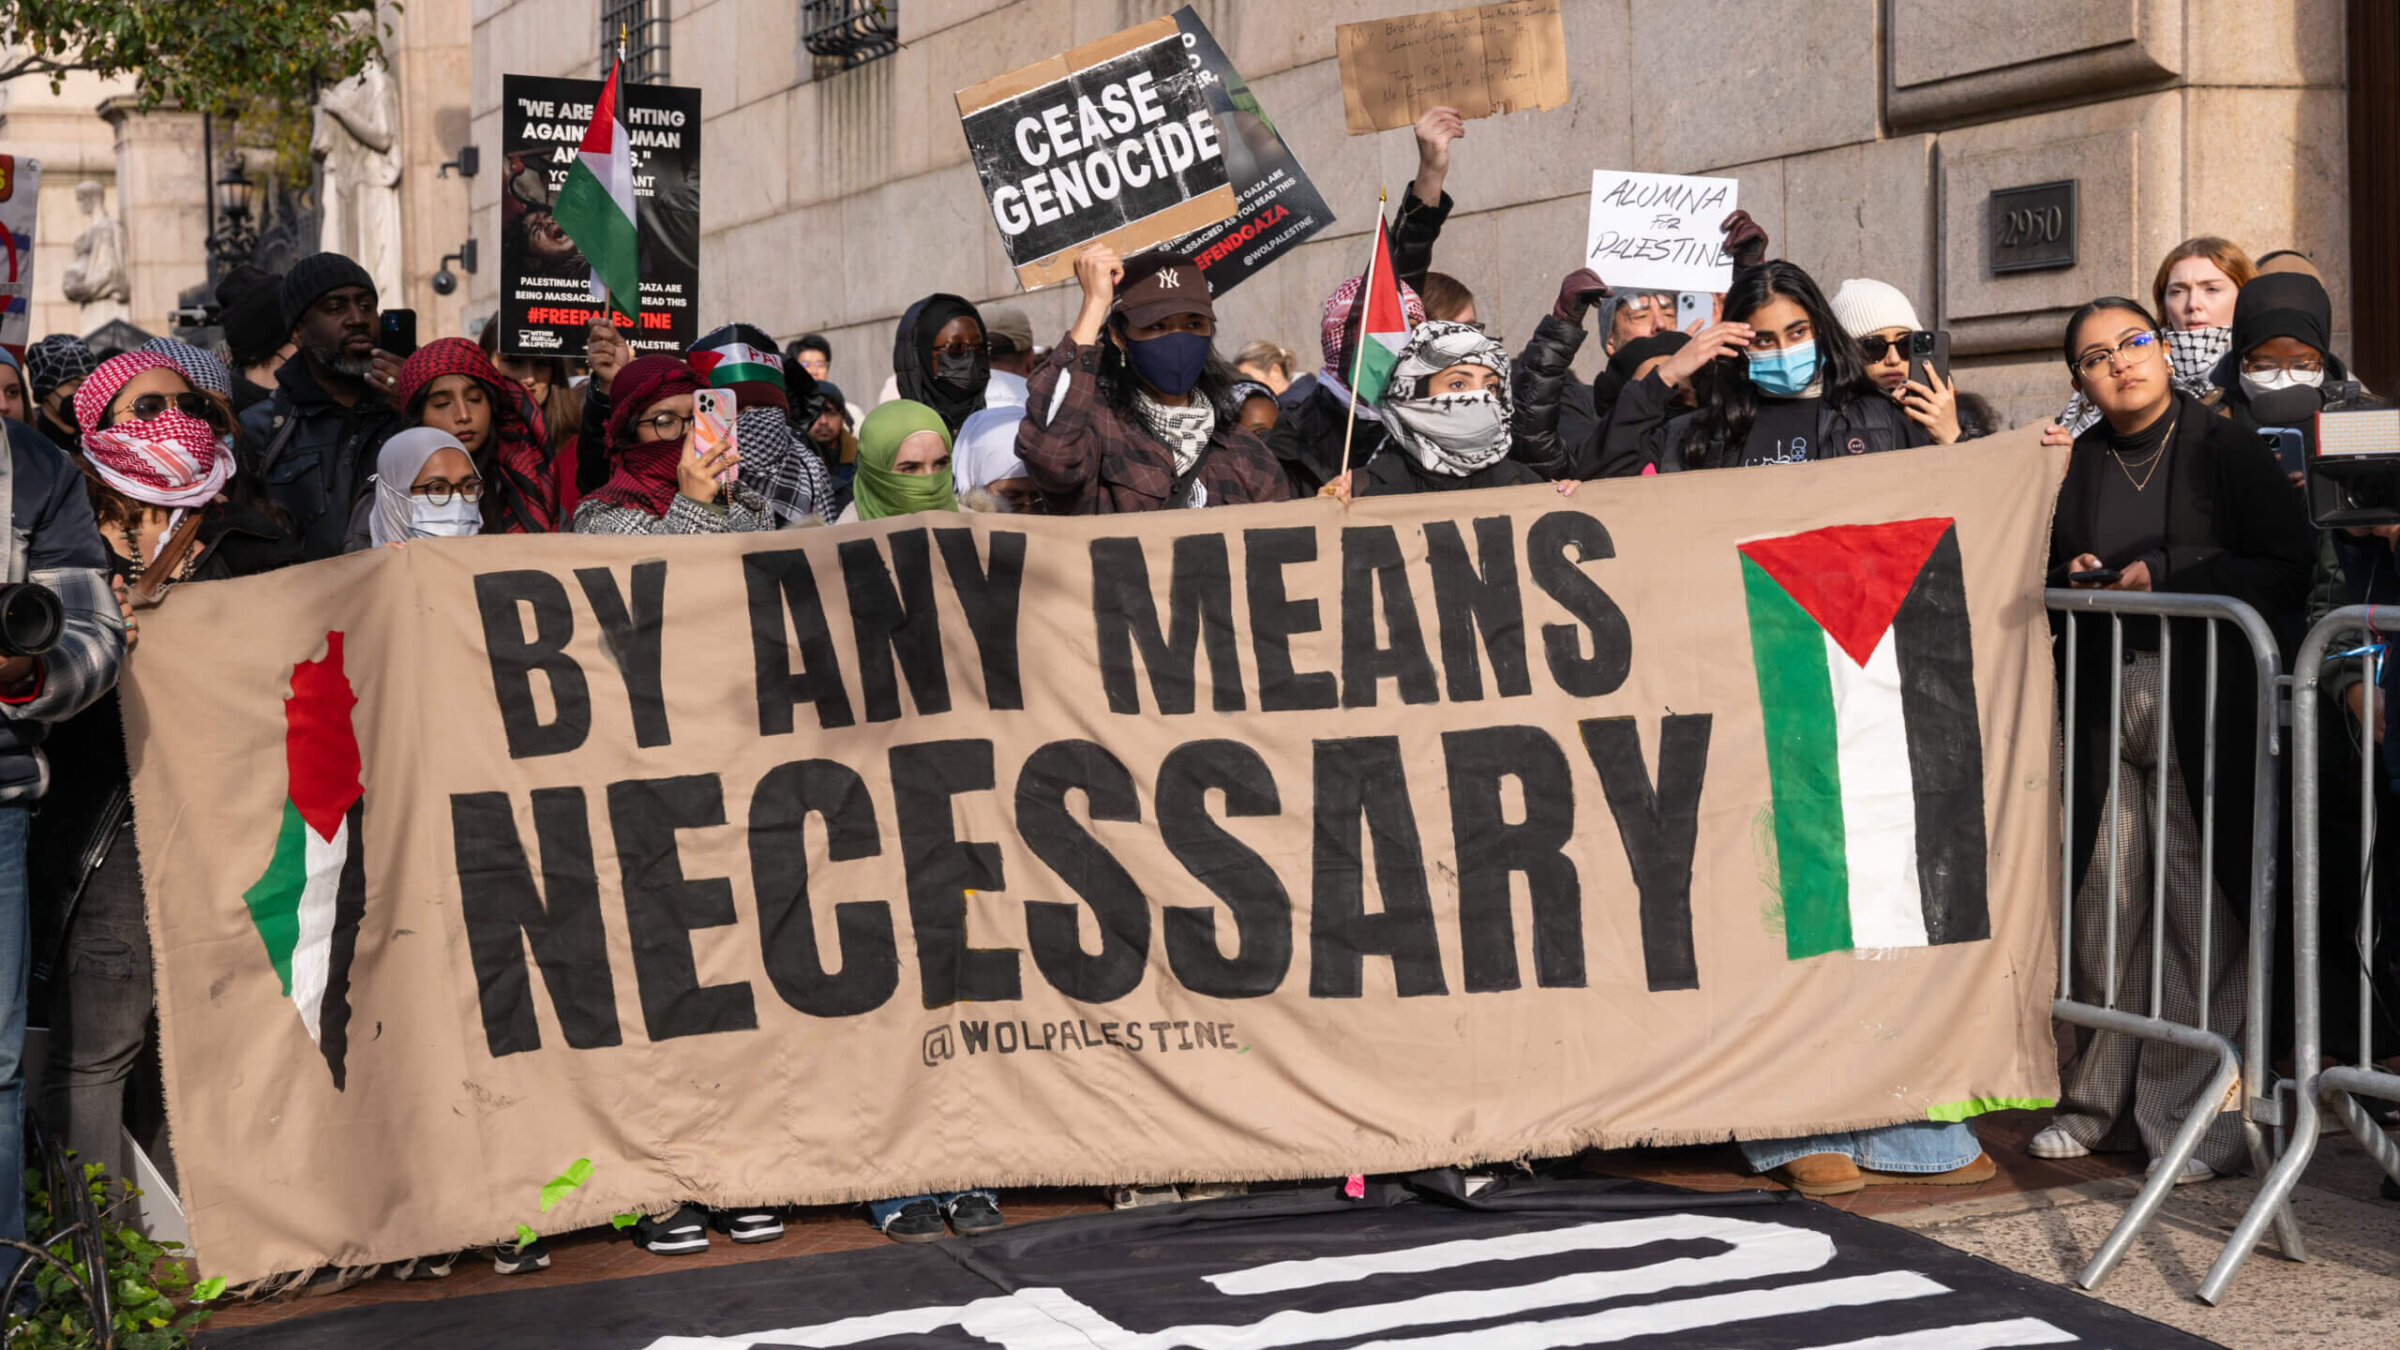 Students participate in a protest in support of Palestine outside of the Columbia University campus on Nov. 15. A large banner reads, "by any means necessary," with an image of the Palestinian flag